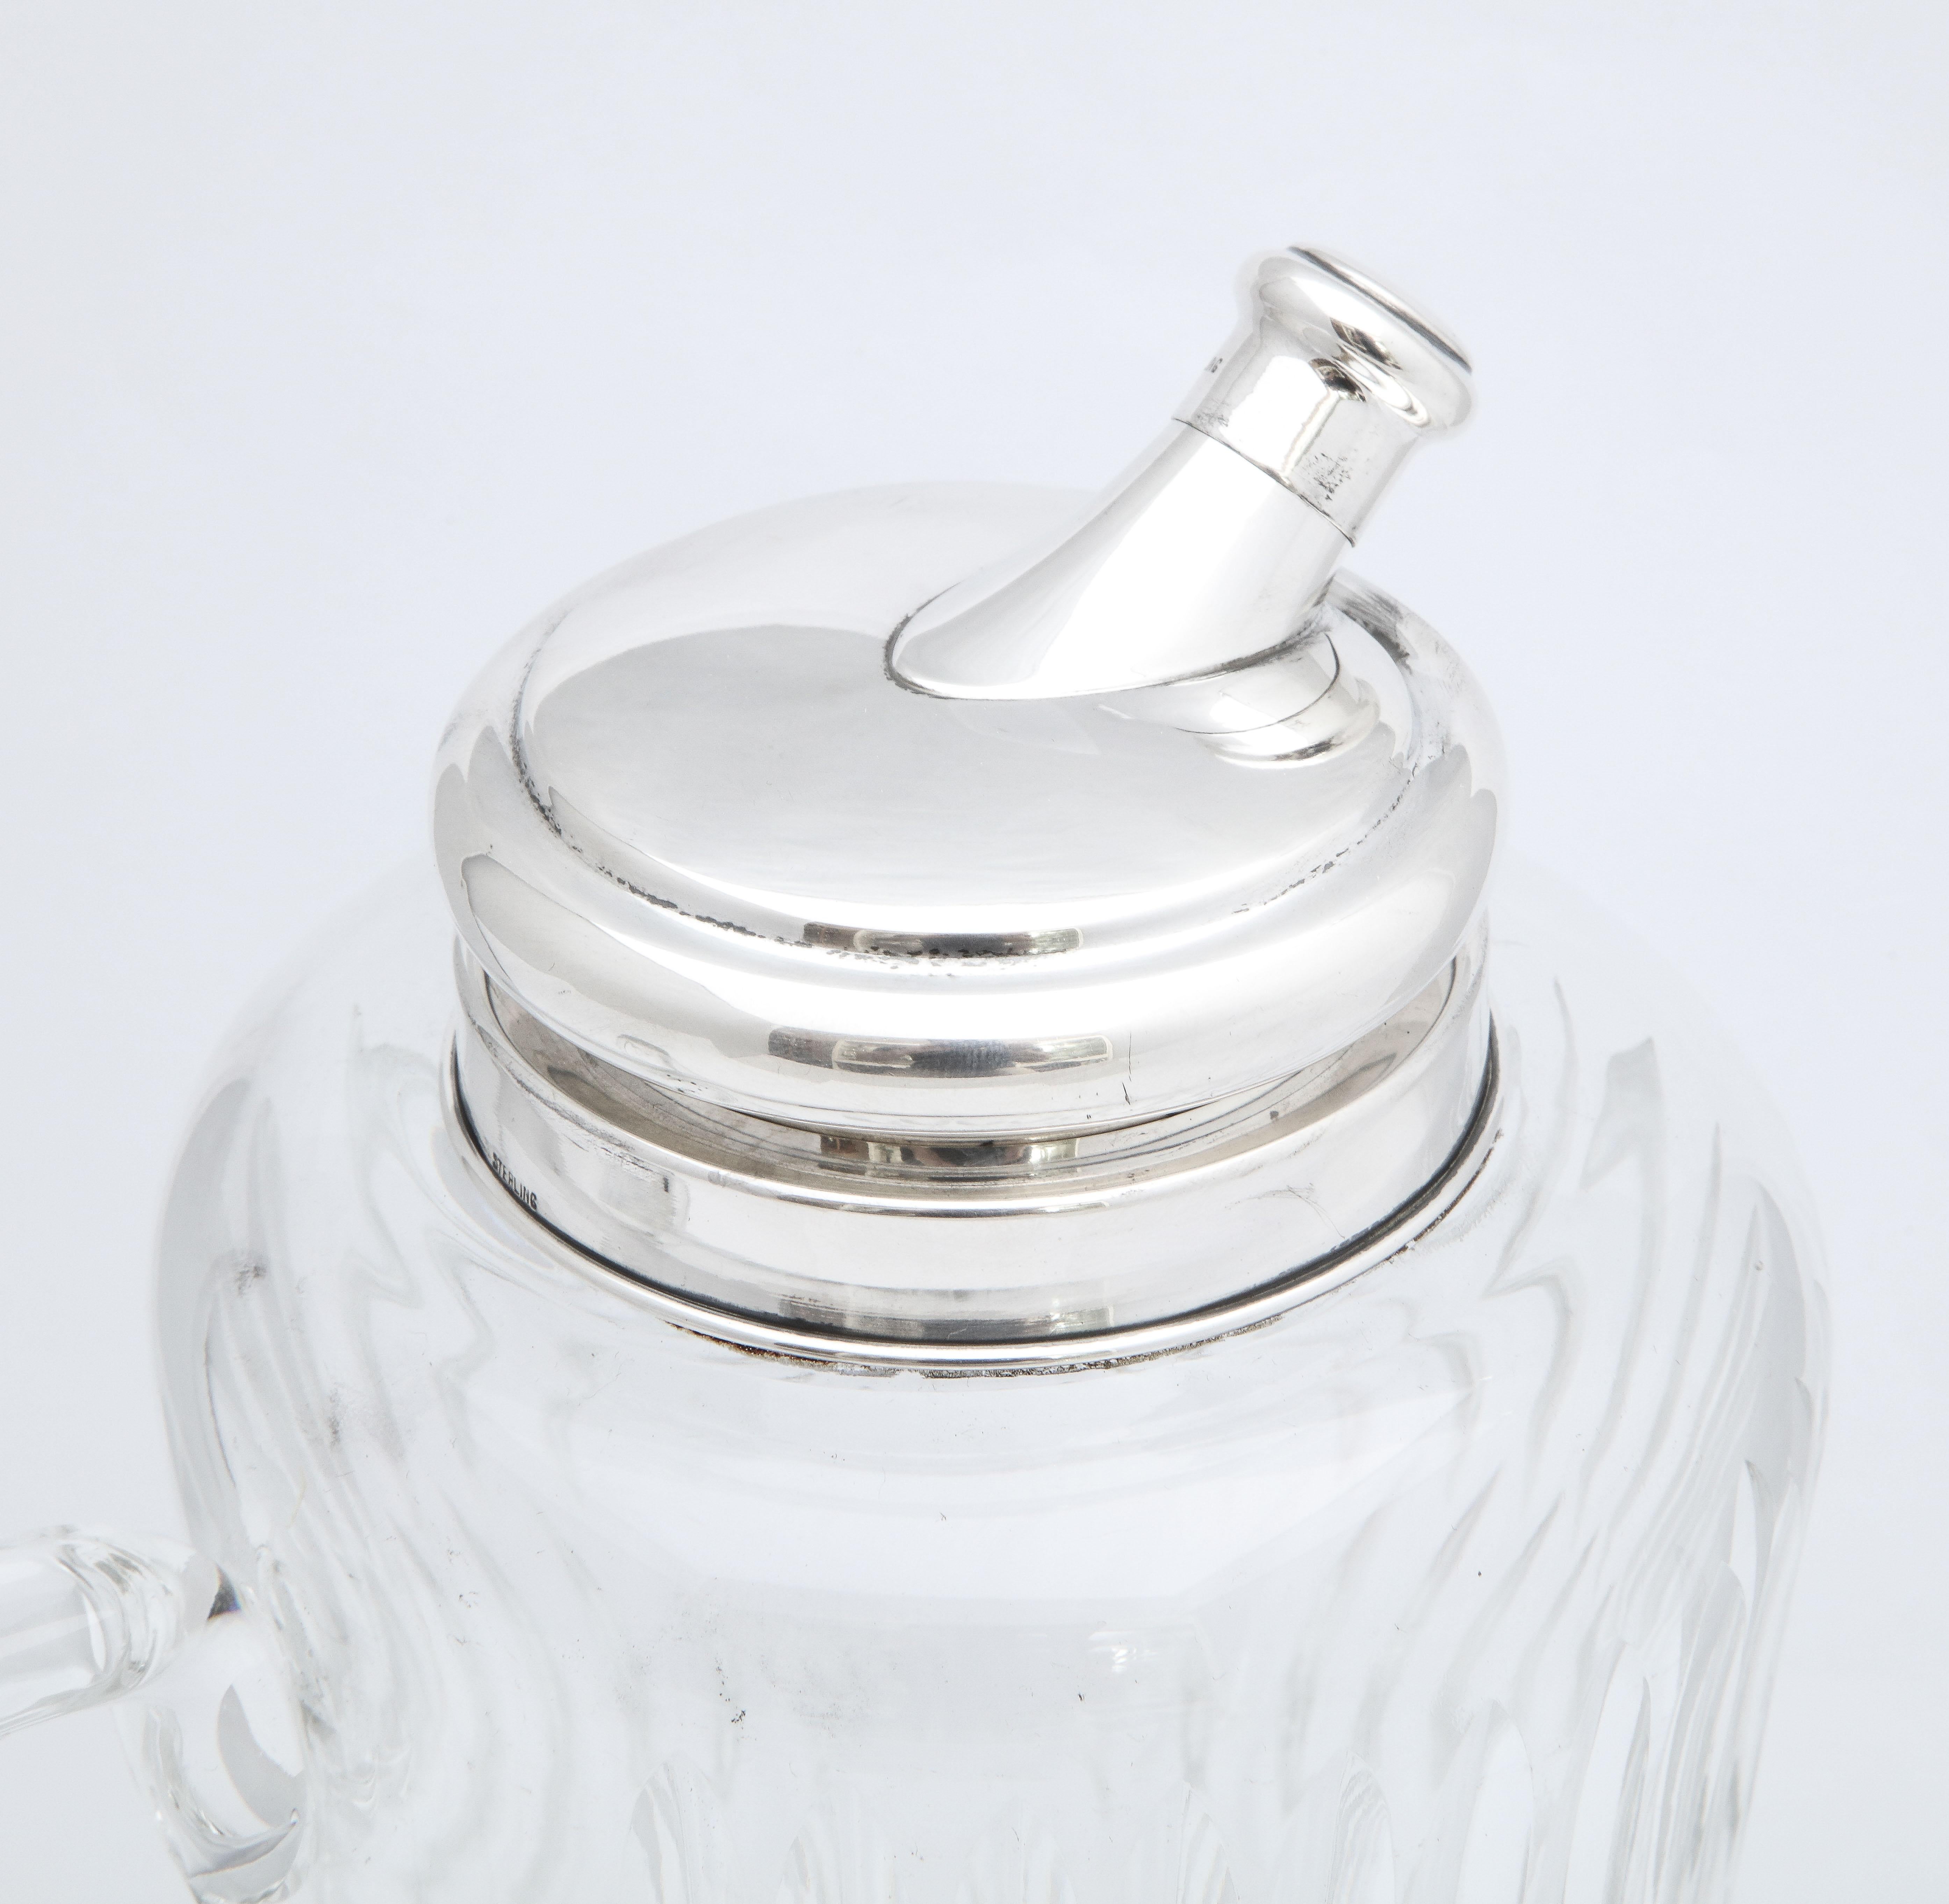 American Mid-Century Sterling Silver-Mounted Cocktail Shaker by T.C. Hawkes & Co.